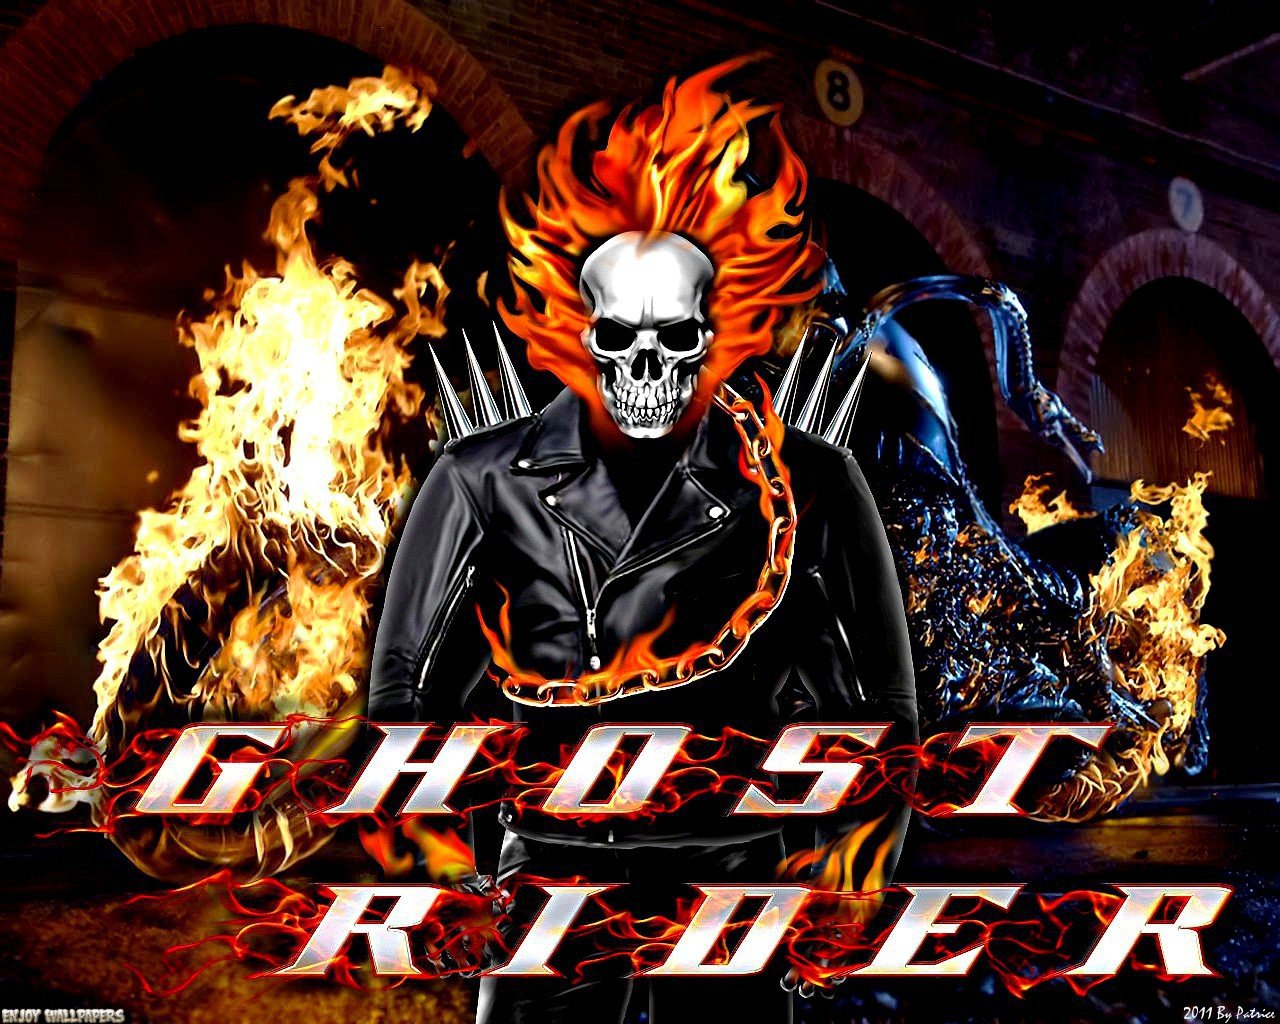  wallpaper wallpaper ghost rider ghost rider hd wallpapers ghost